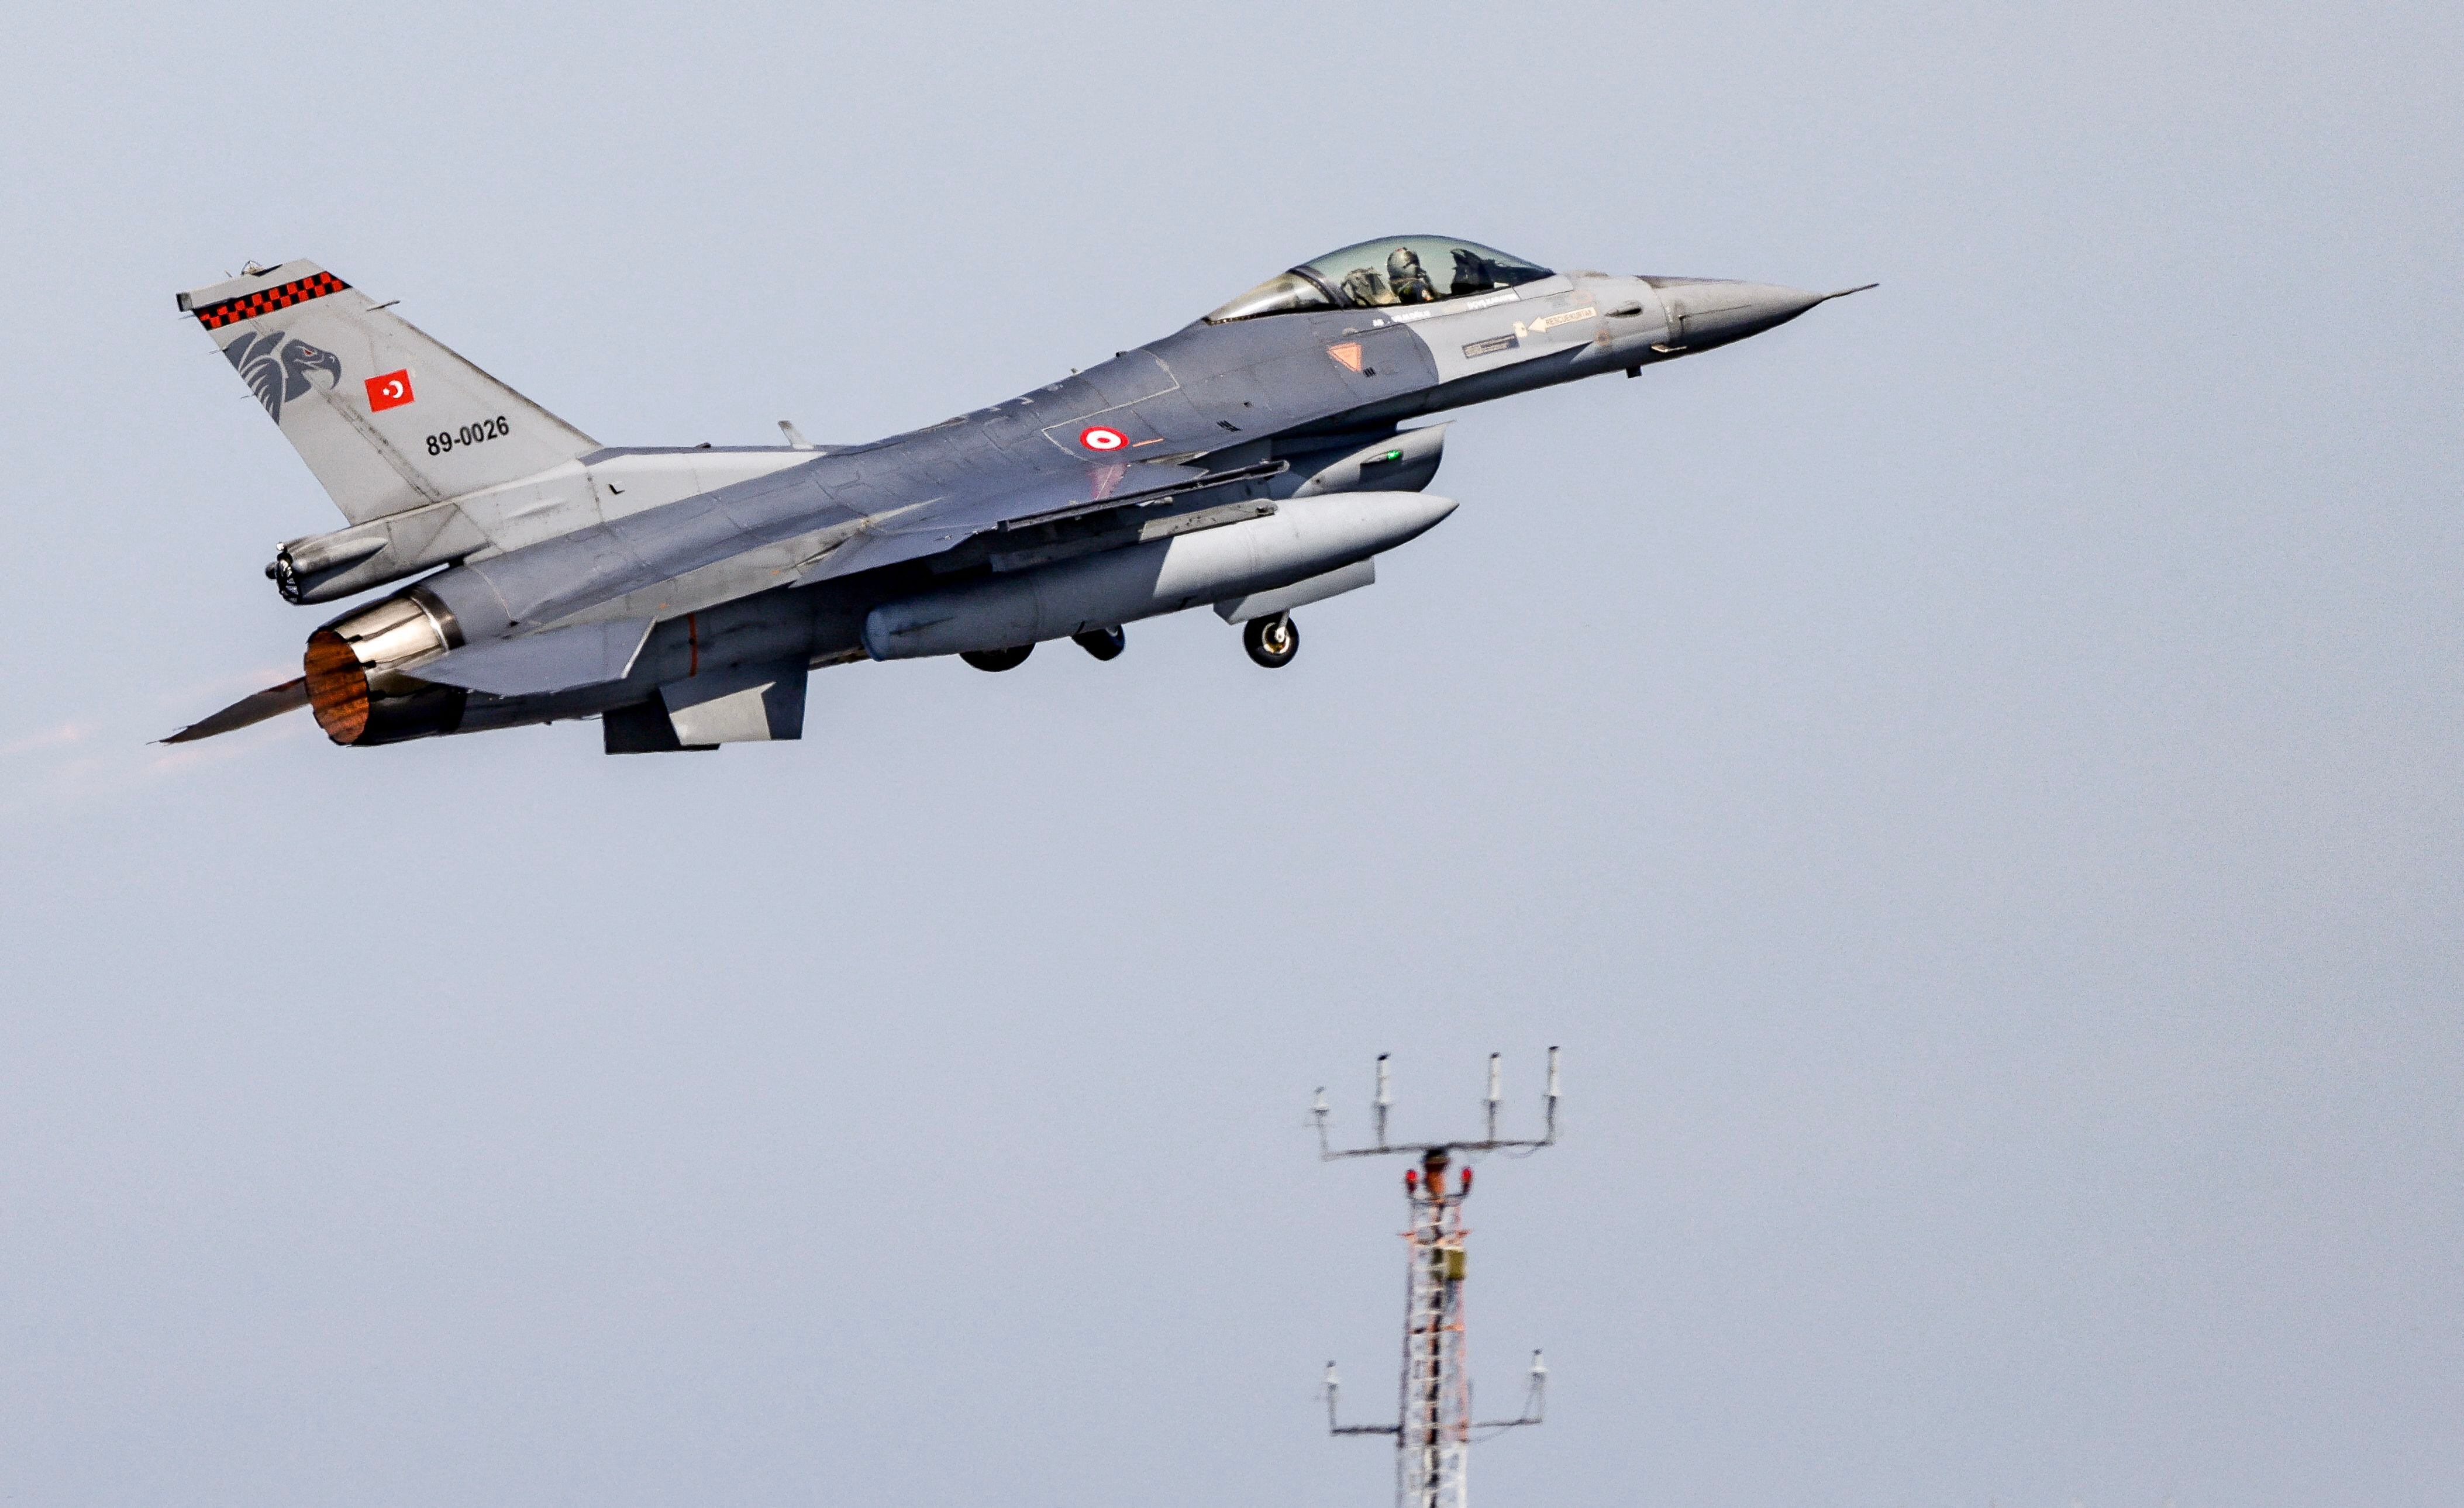 A Turkish air force F-16 fighter jet takes off in northern Germany, on June 9, 2023. (Photo by Axel Heimken/POOL/AFP)